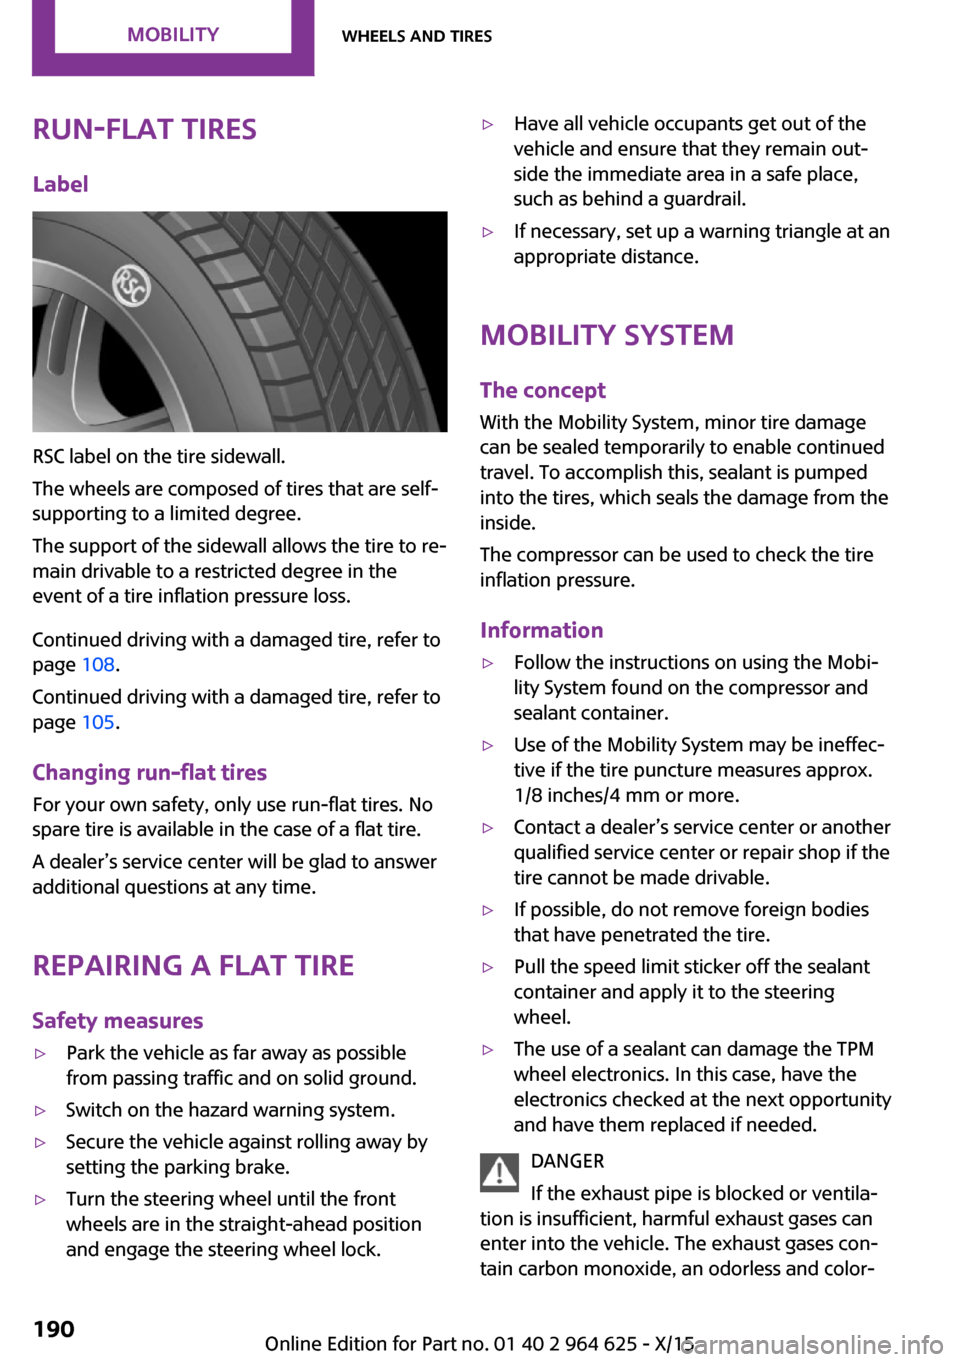 MINI 5 door 2015  Owners Manua Run-flat tiresLabel
RSC label on the tire sidewall.
The wheels are composed of tires that are self-
supporting to a limited degree.
The support of the sidewall allows the tire to re‐
main drivable t